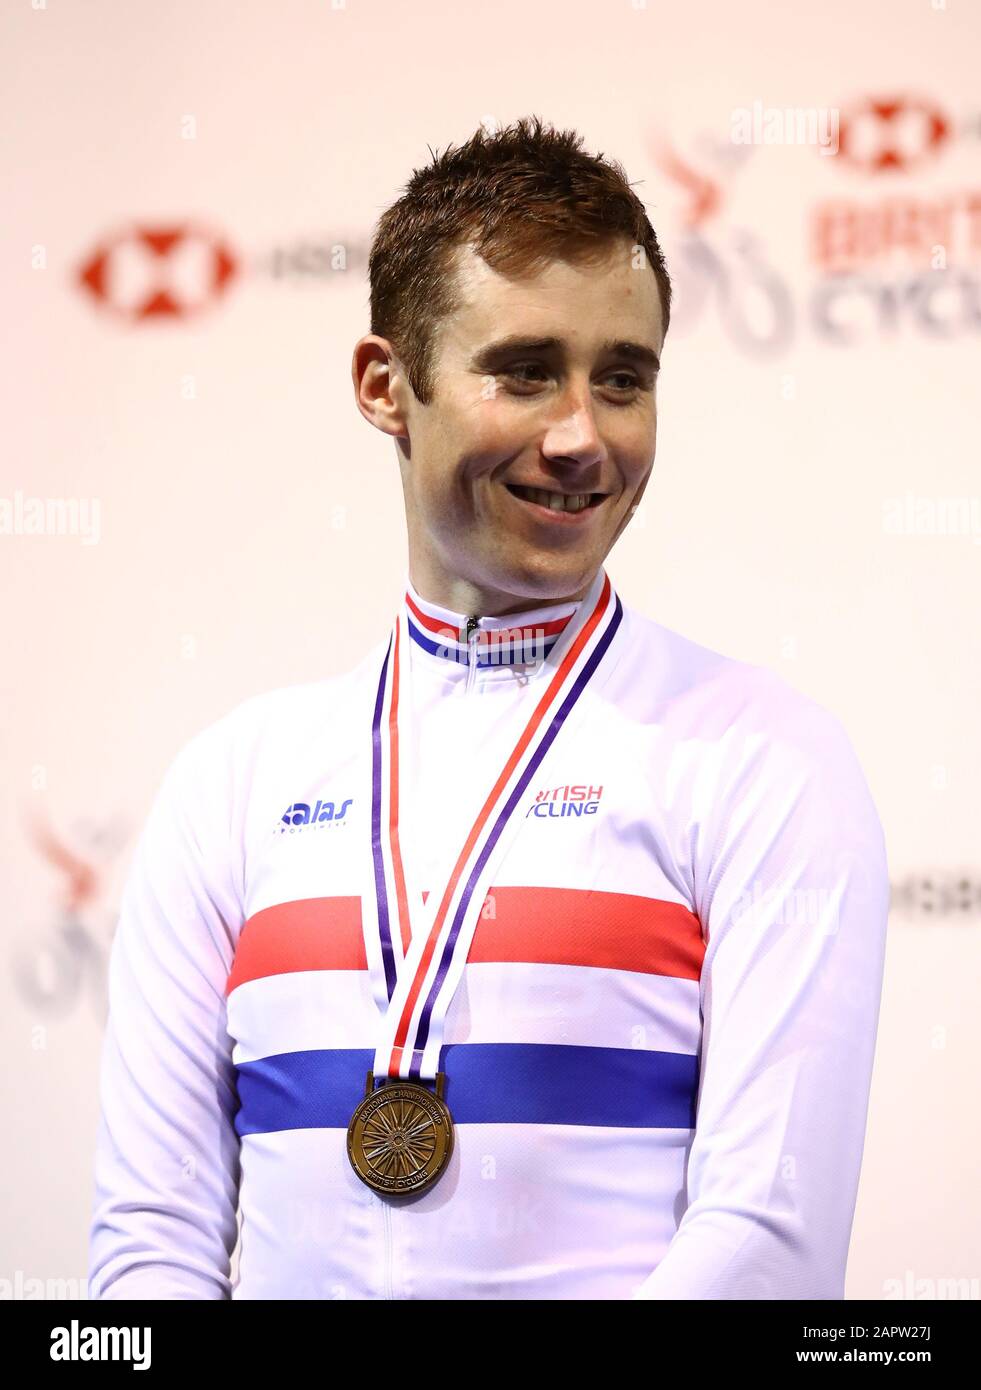 Gold medalist John Archibald after winning the Men's Individual Pursuit during day one of the HSBC UK National Track Championships at the National Cycling Centre, Manchester. Stock Photo